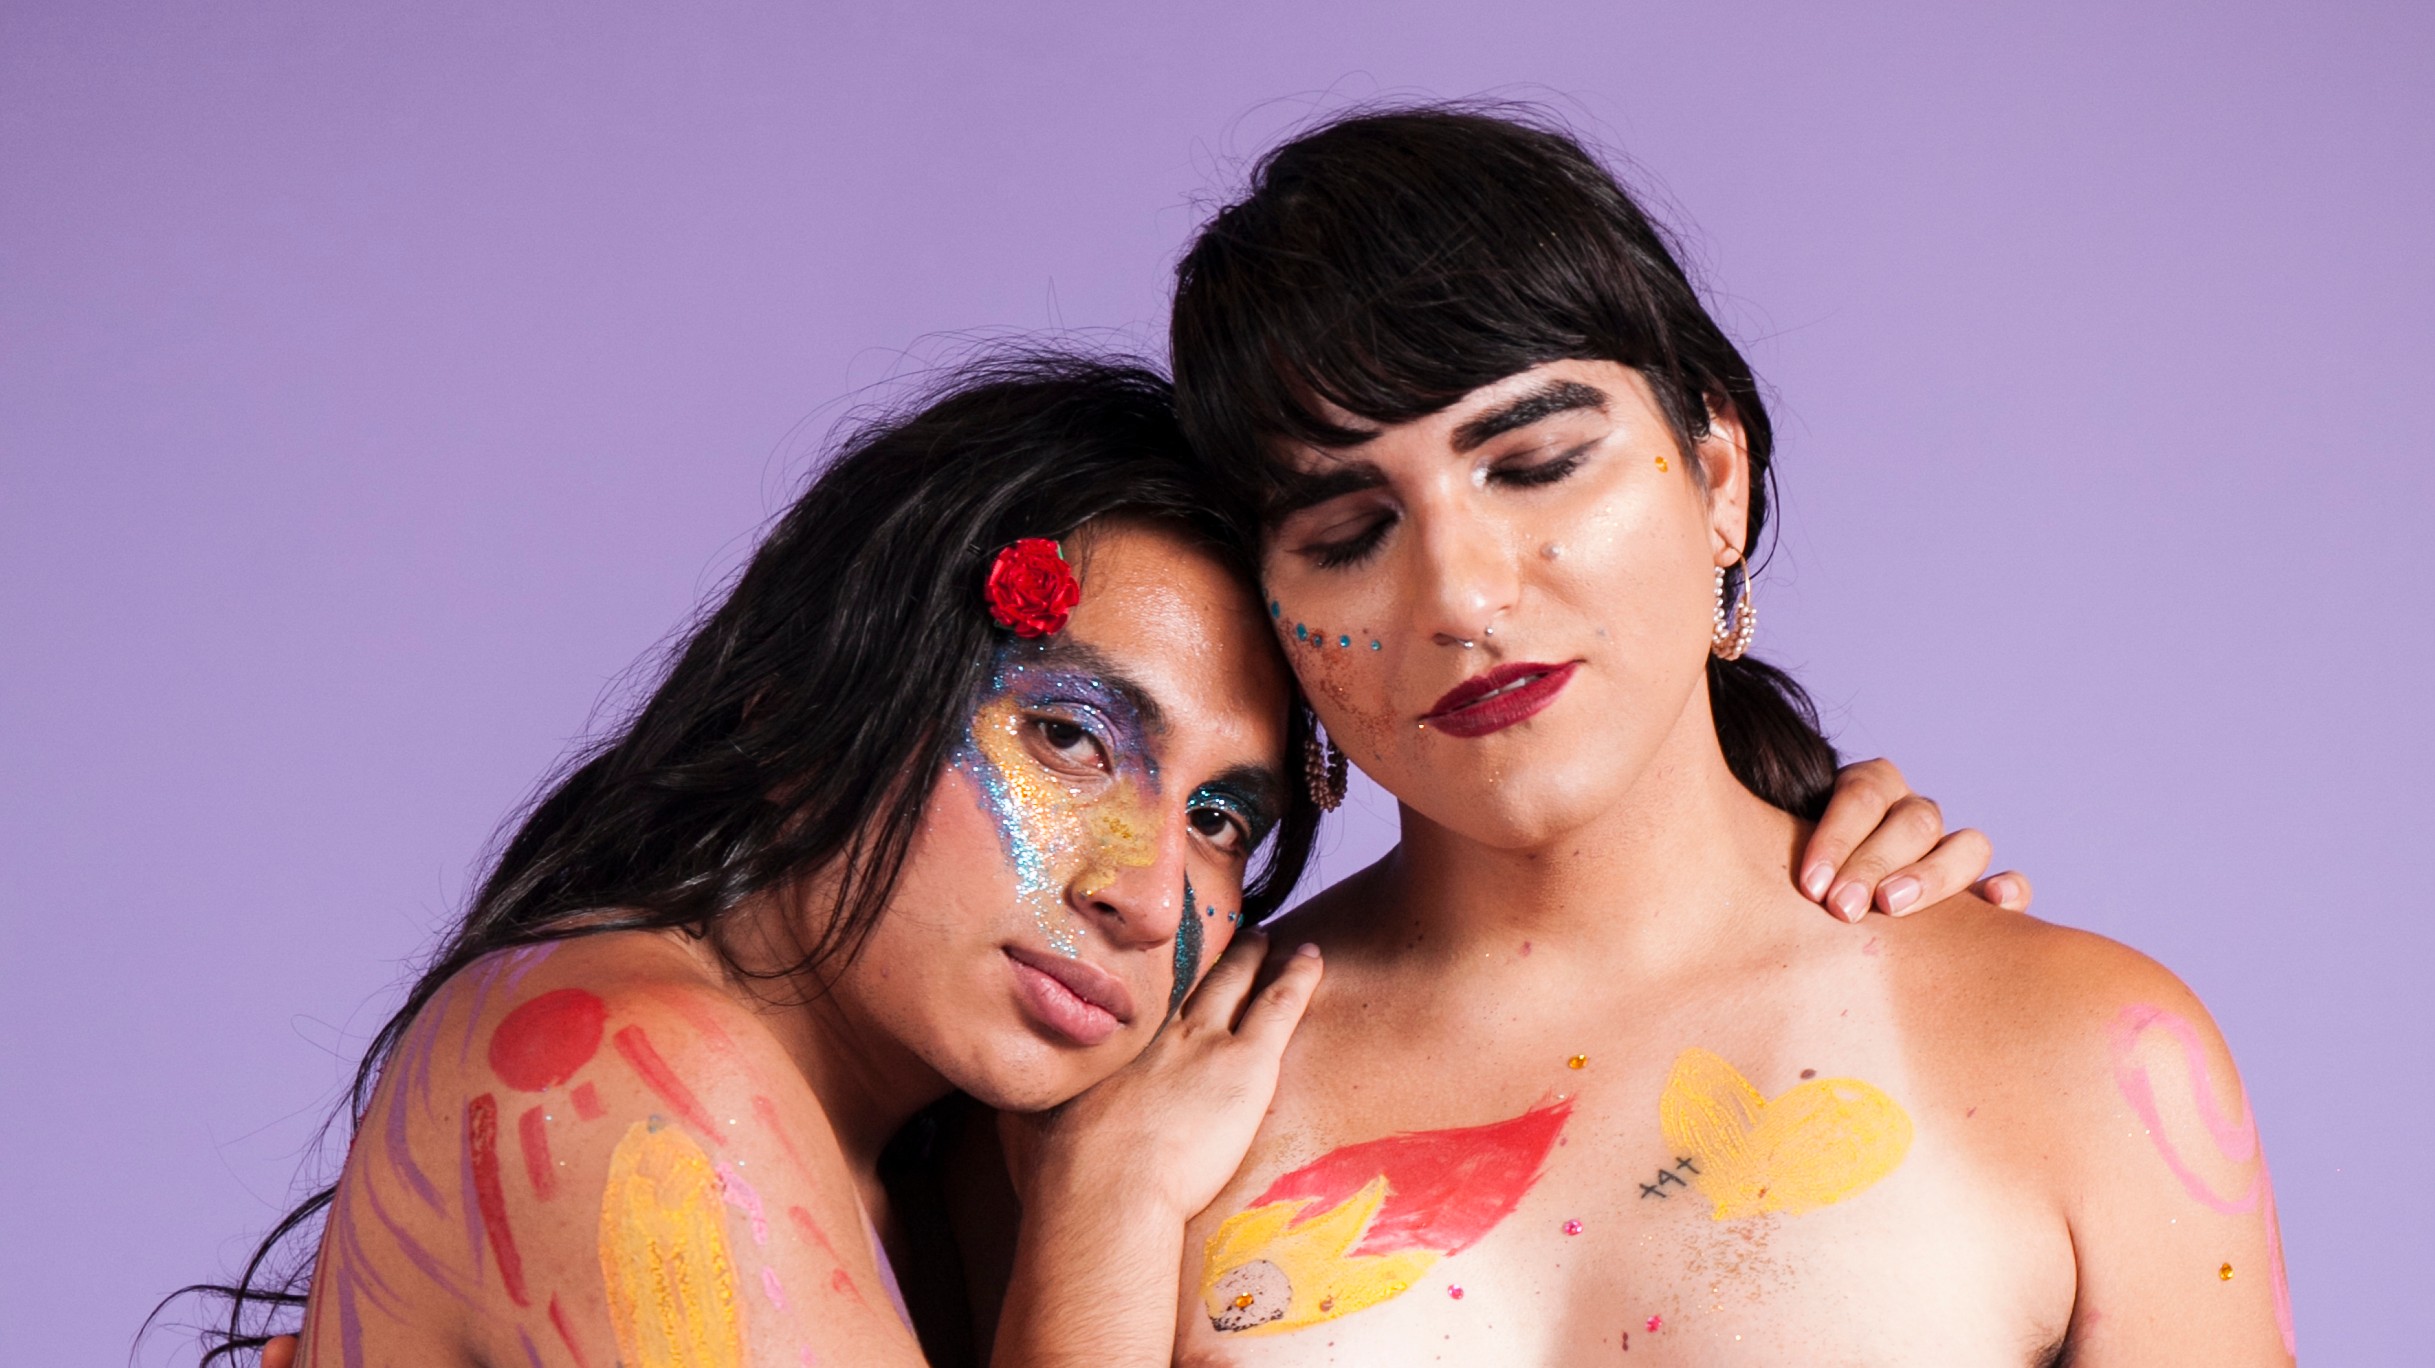 This naked paint party celebrates trans and gnc bodies